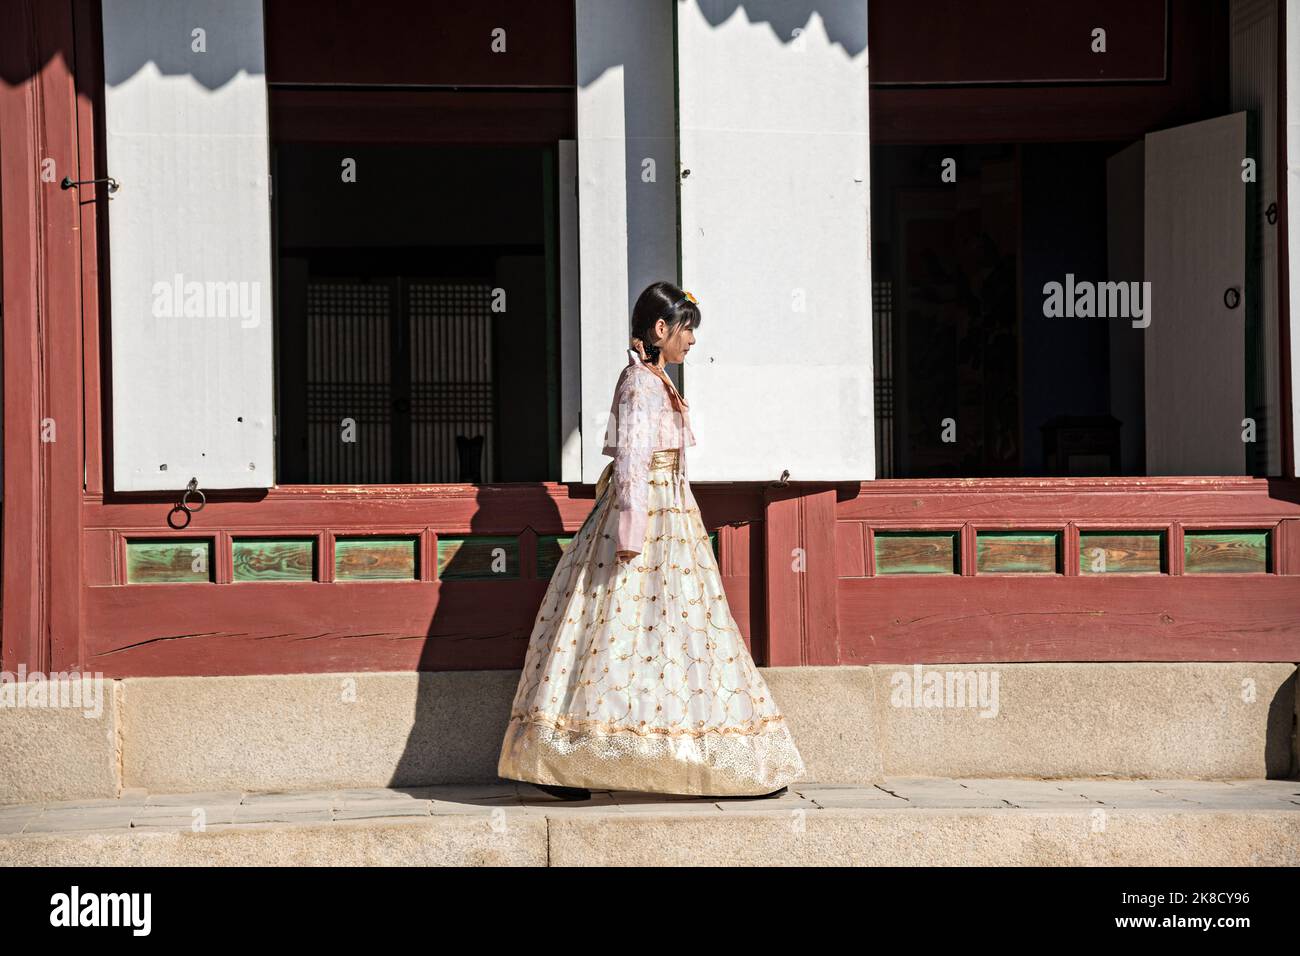 A Chinese tourist, dressed in traditional Korean costume walks through the Geunjeong-jeon or Throne Hall, at the Gyeongbokgung Palace in Seoul, South Korea. Stock Photo